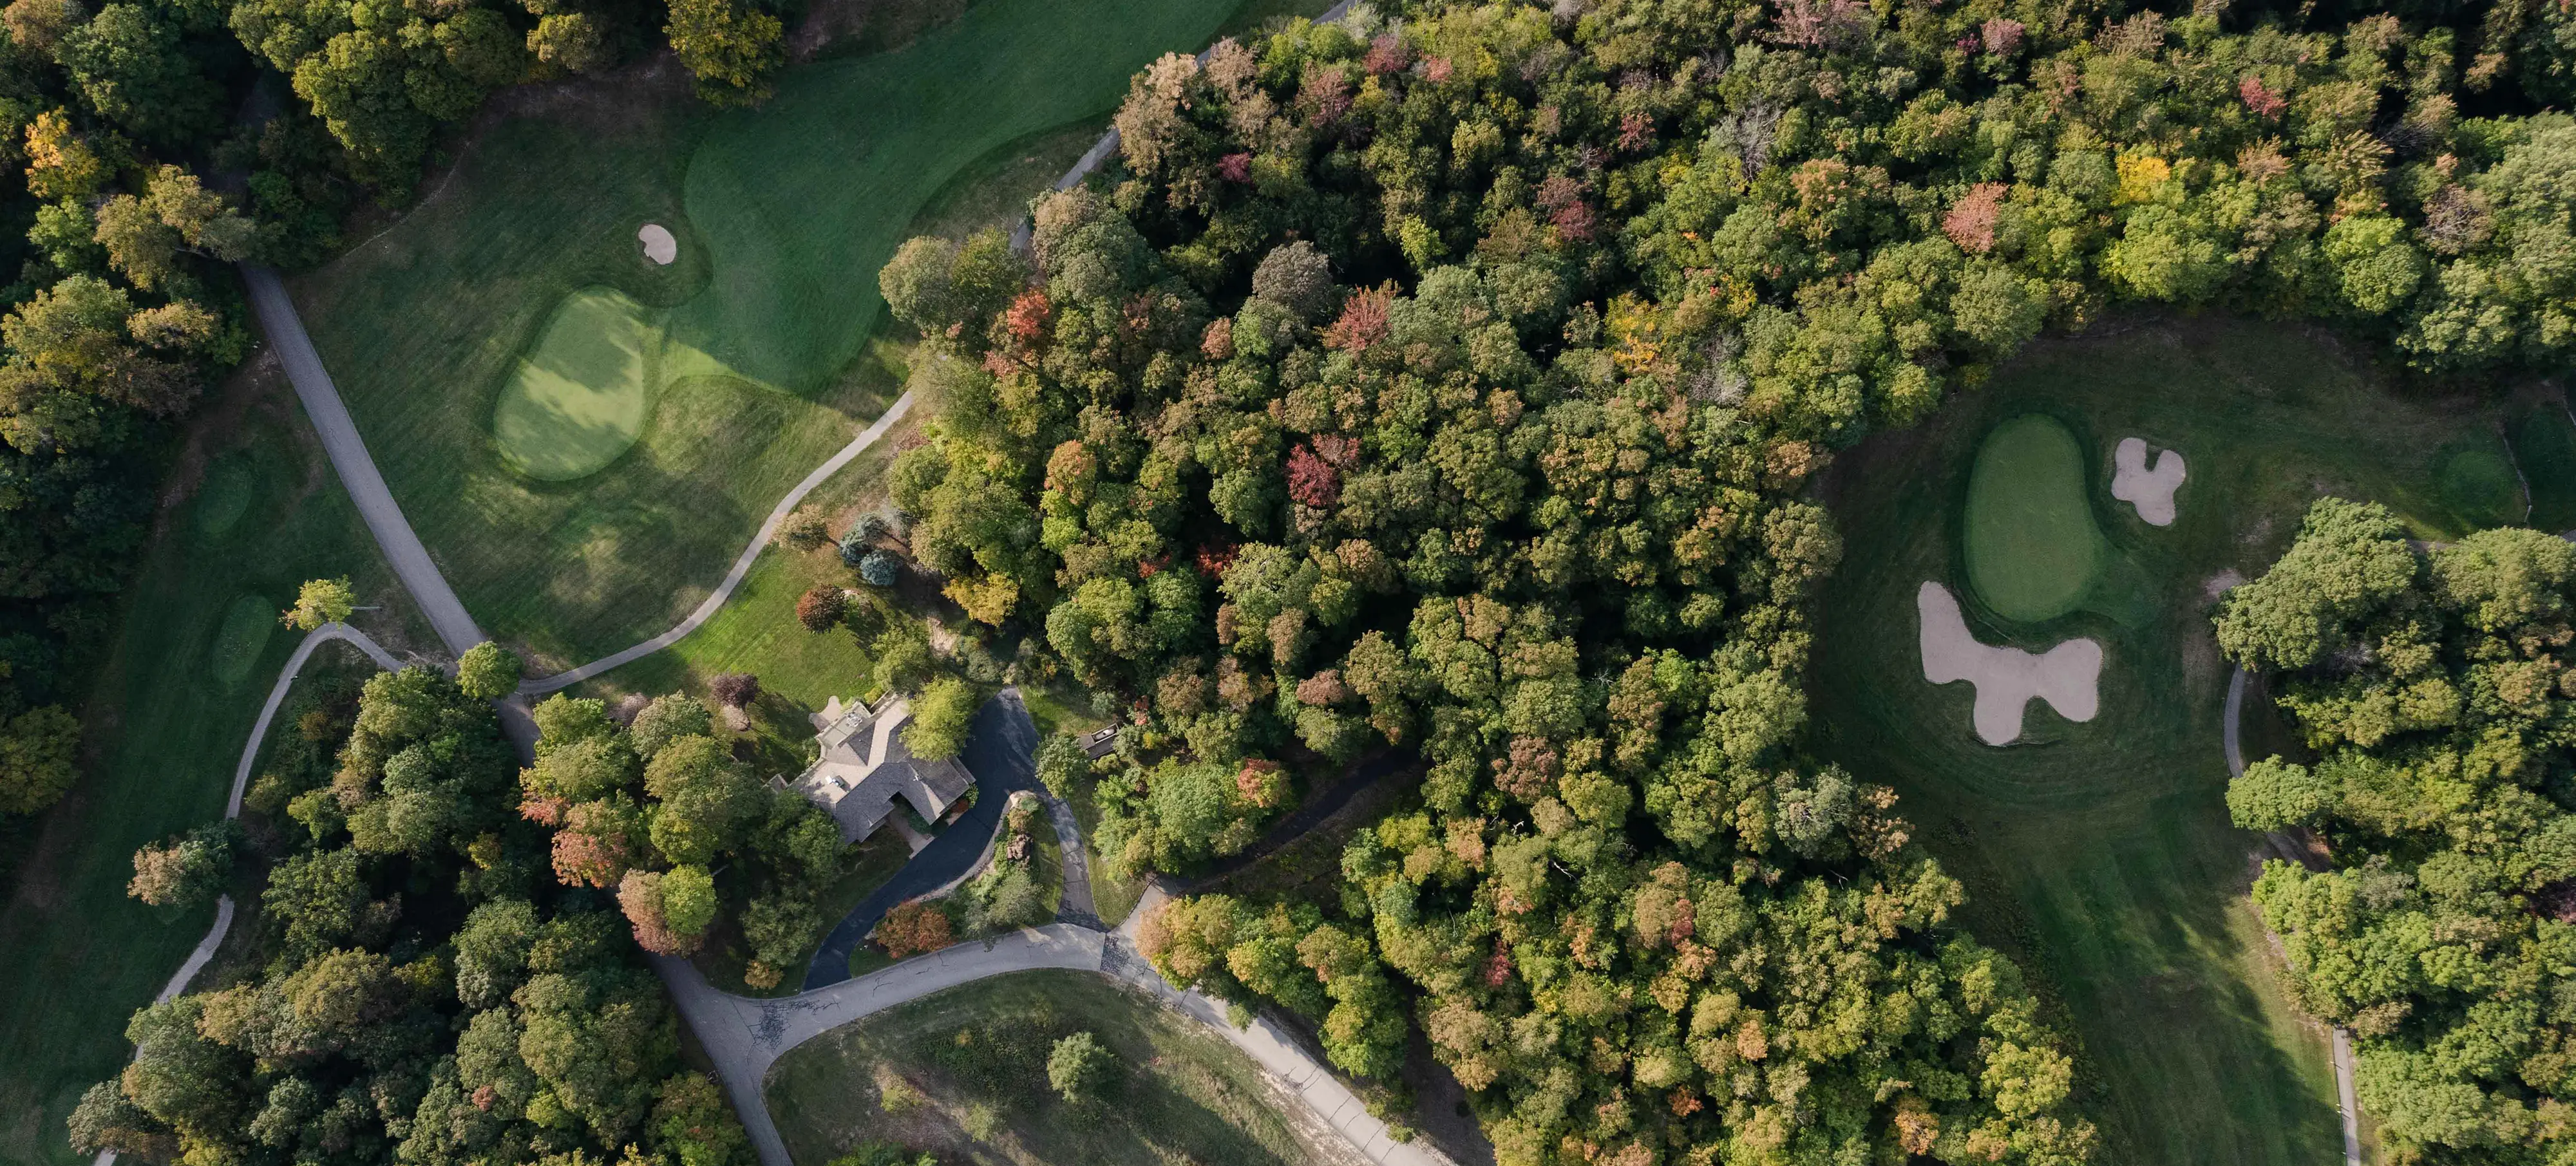 Suffolk golf course shot from drone